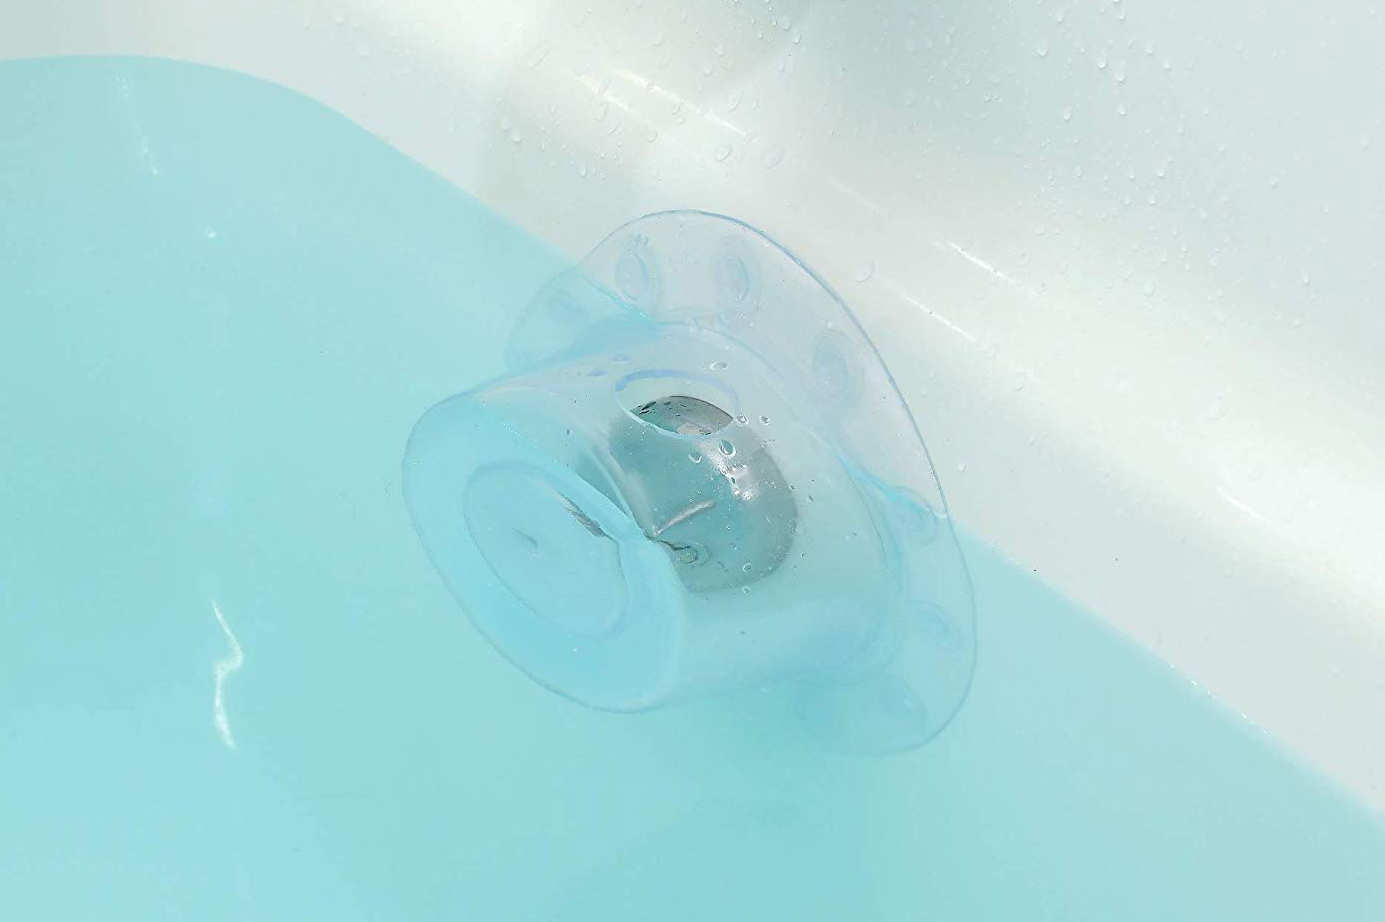 SlipX Solutions Adjustable Better Soak Overflow Drain Cover Fits All Drain  Types for The Deepest Baths (Silicone, White)